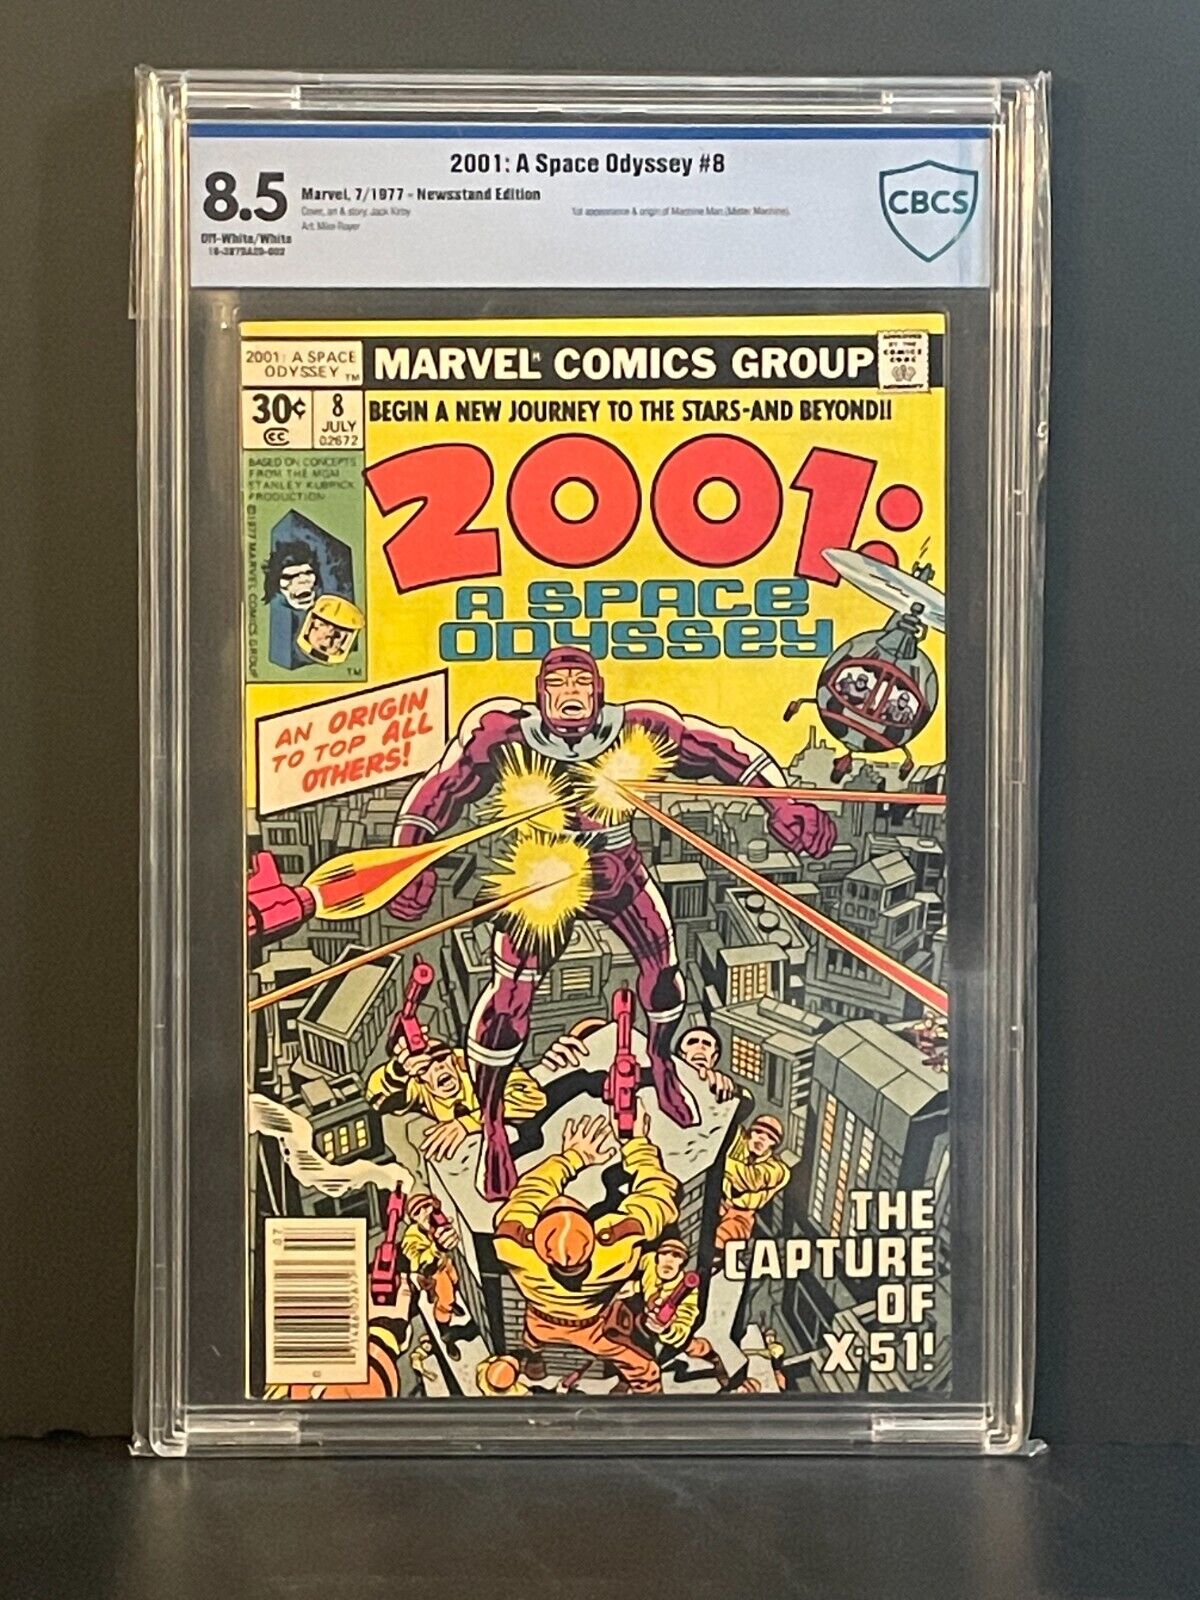 2001: A Space Odyssey #8 CBCS 8.5 1st appearance of X-51 Machine Man Kirby 1977